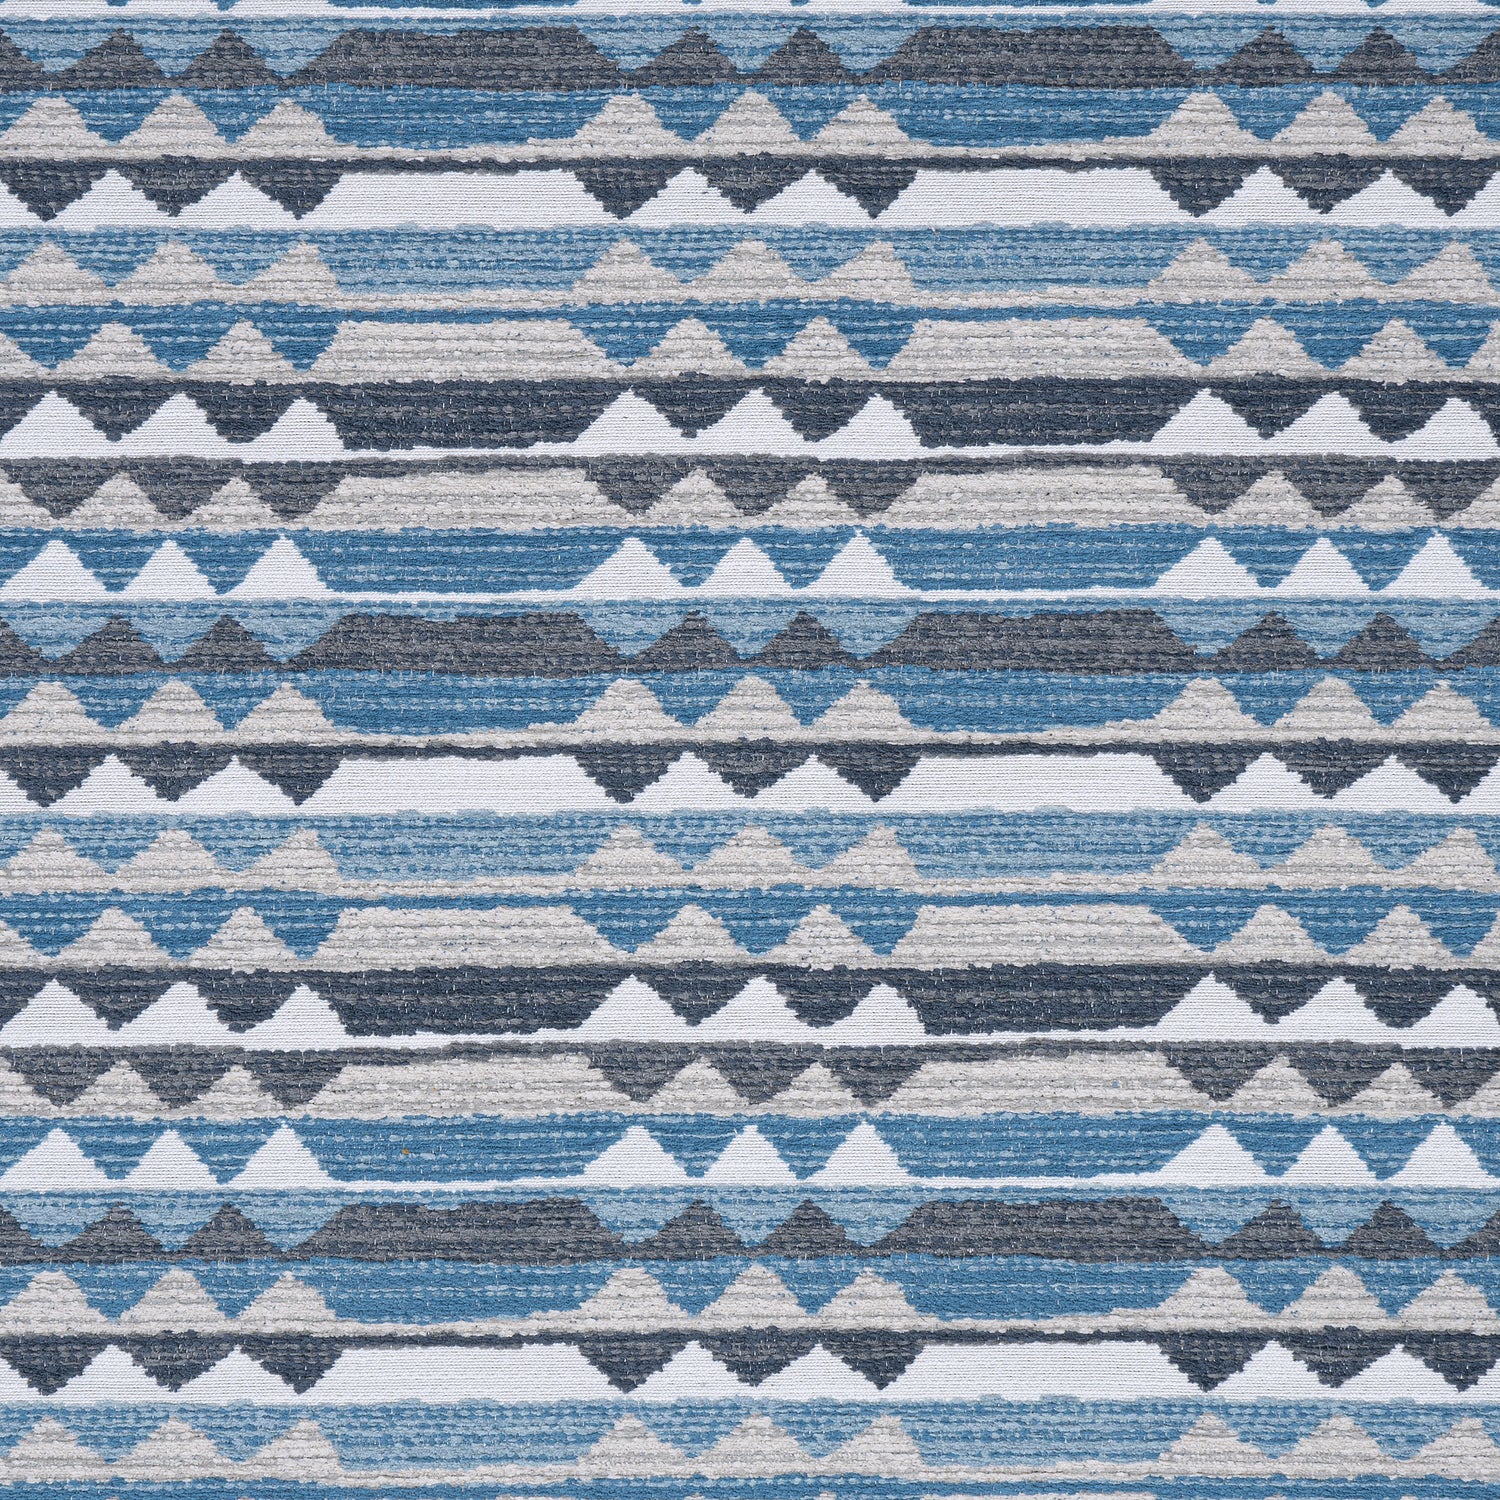 Saranac fabric in waterfall color - pattern number W78376 - by Thibaut in the  Sierra collection